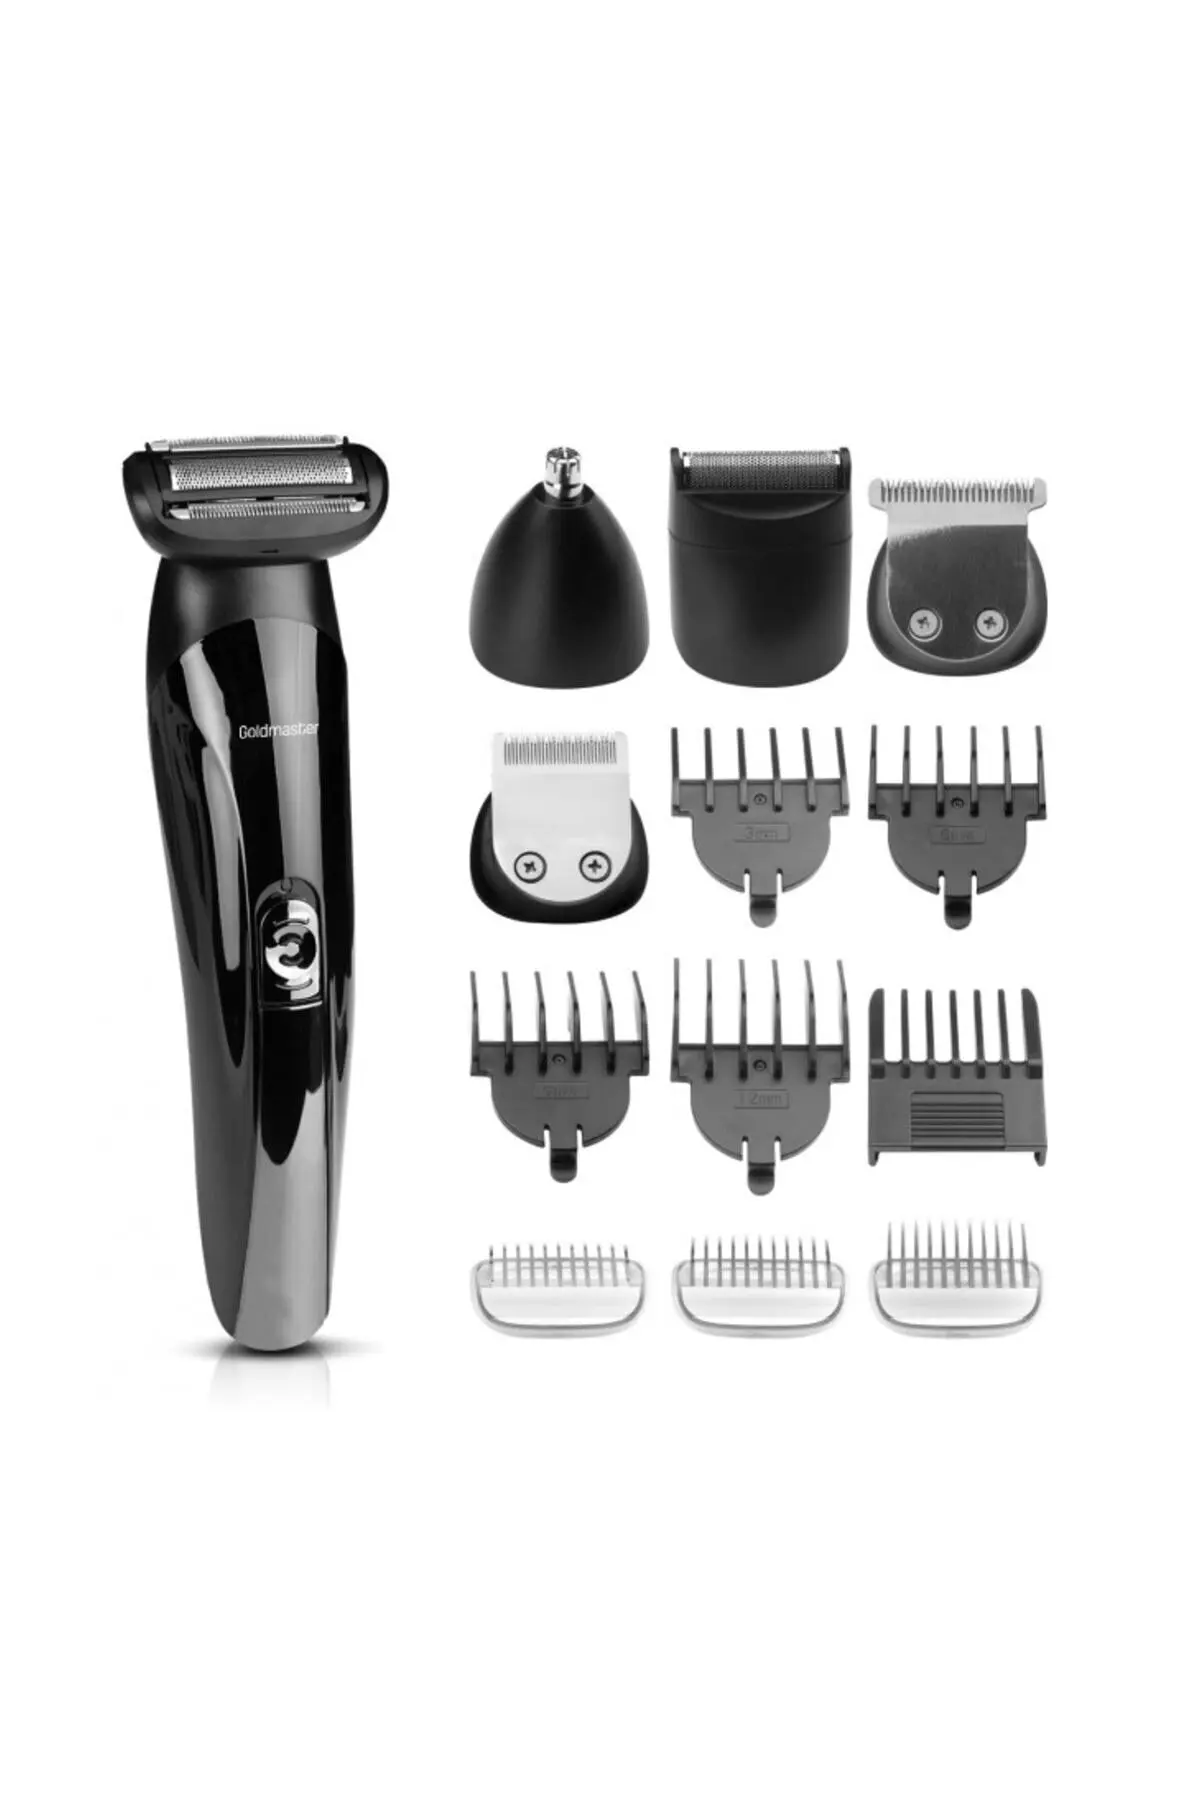 GM-7178 Trend 13 In 1 Wireless Grooming Set Hair Clipper Hair Trimmer For Men Rechargeable Electric Shaver Beard Barber Hair Cut